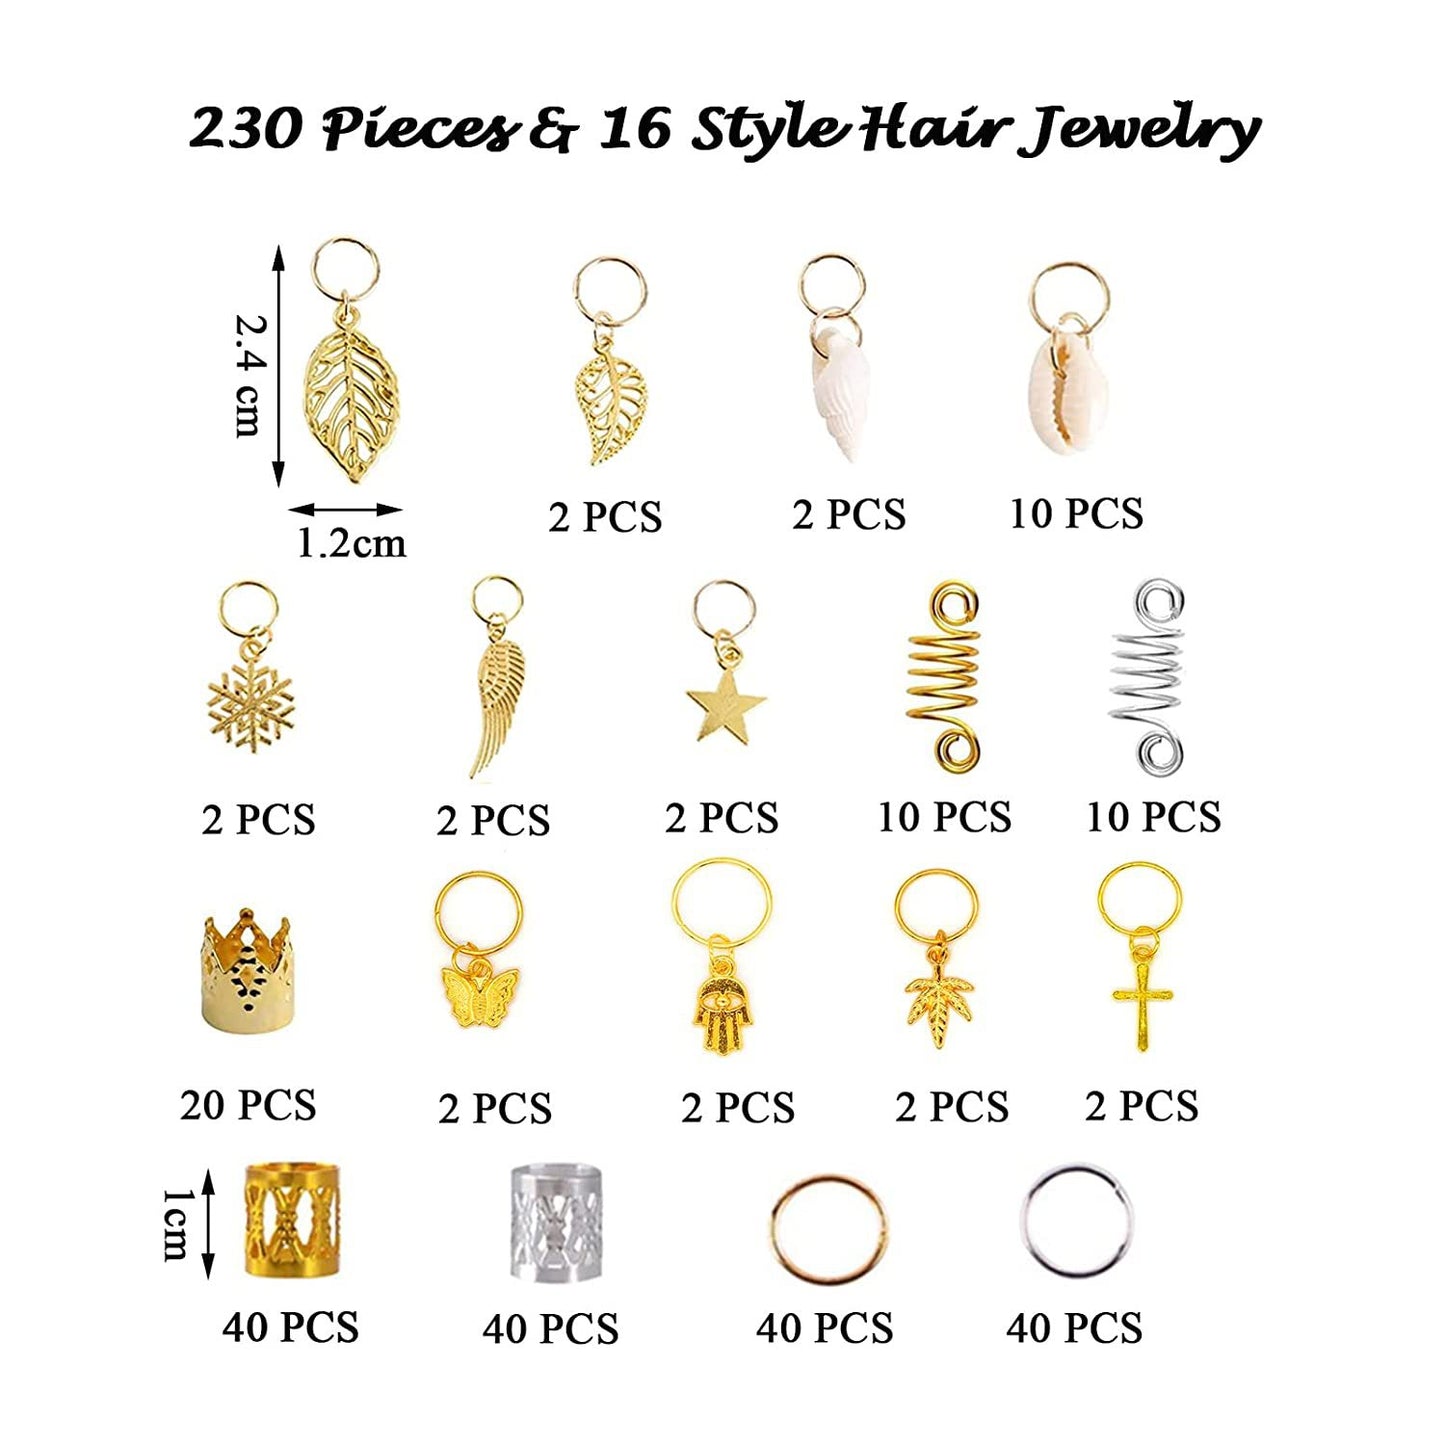 Bulk Hair Accessory for Women 230 Pcs Hair Jewelry for Braids Loc Jewelry Hair Decorations Leaf Pendant Hair Accessories Adjustable Spring Hair Charms Hair Rings for Braids Wholesale